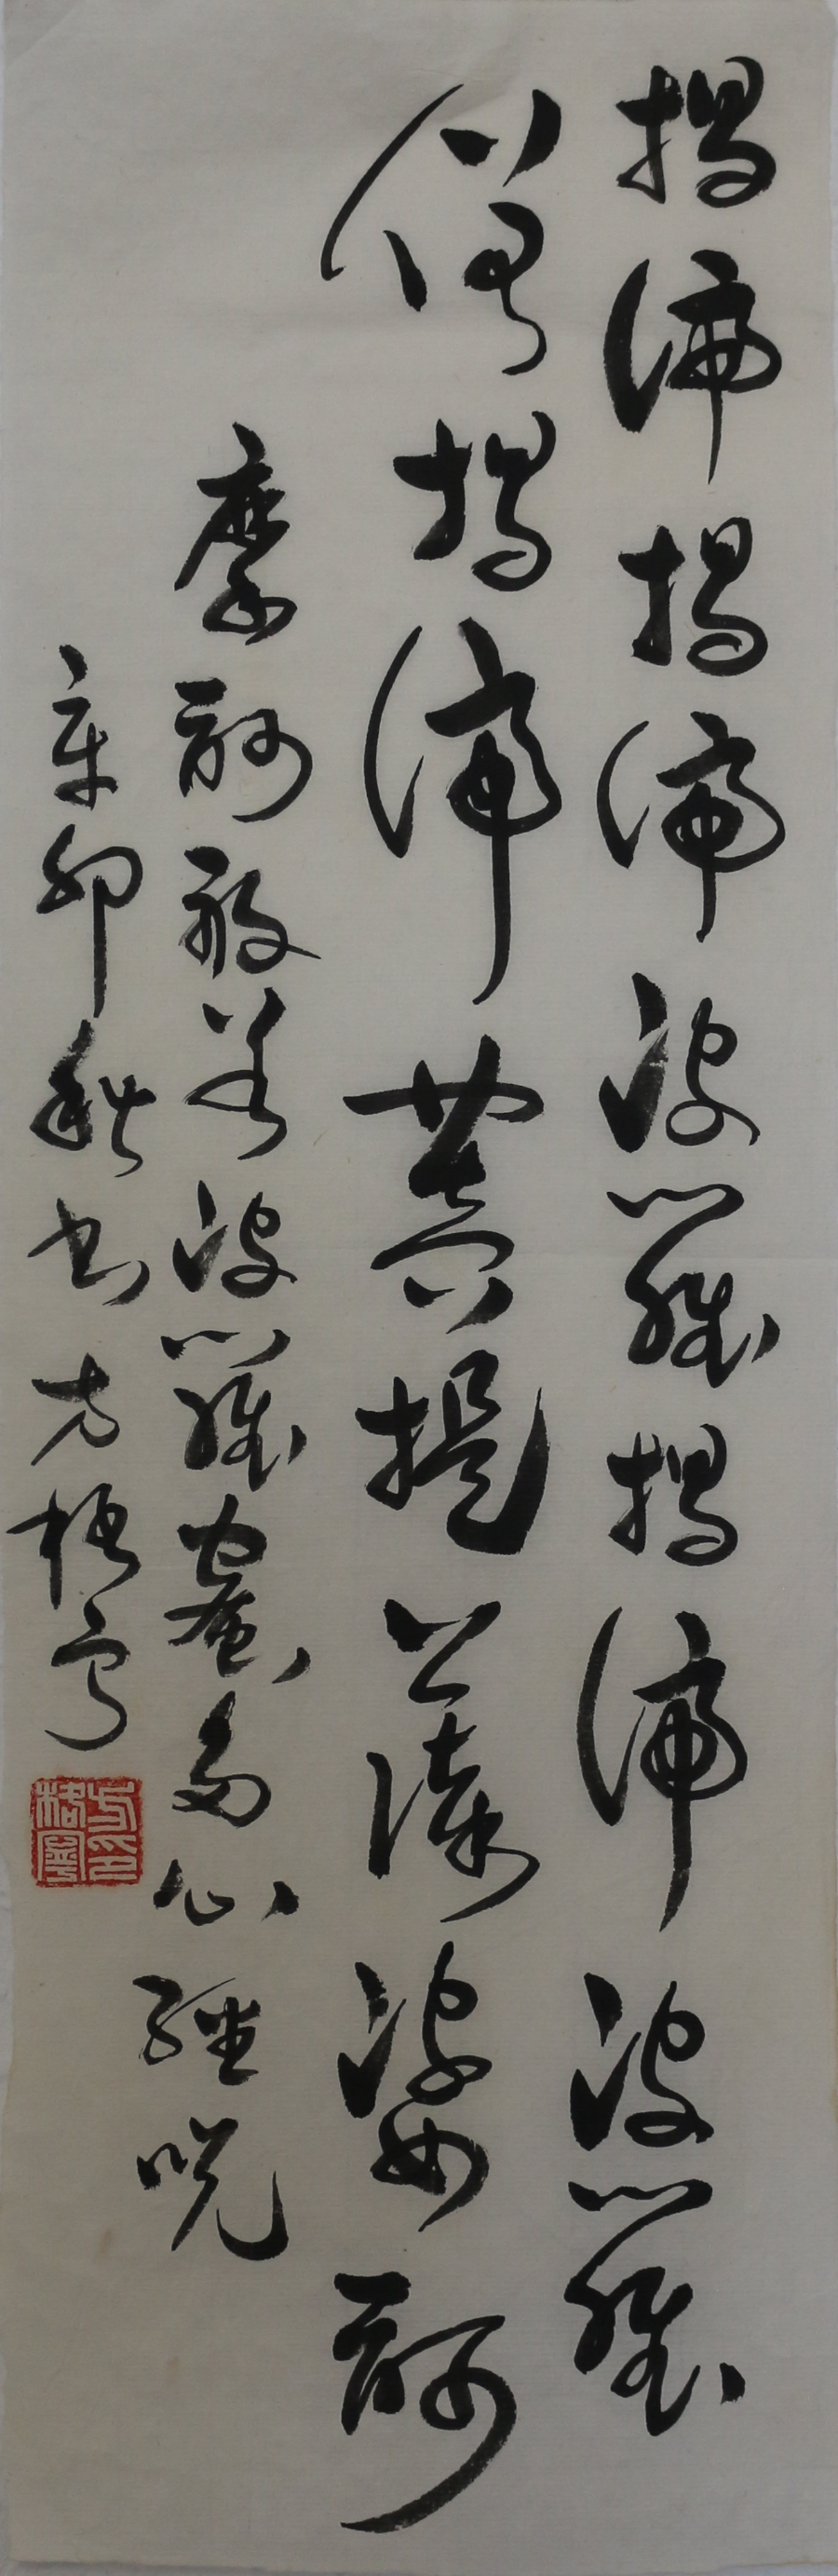 heart sutra Mantra